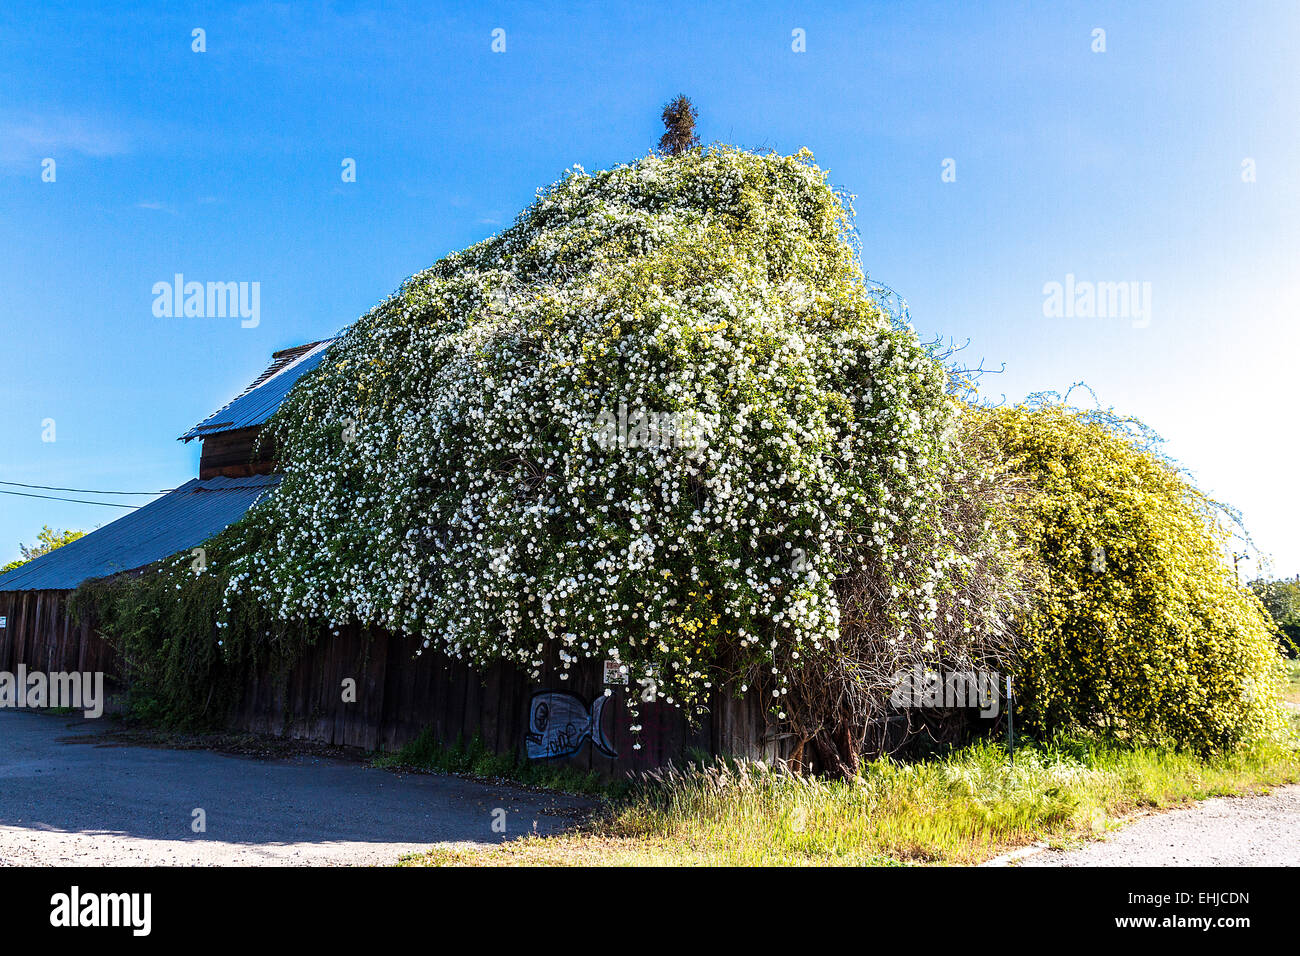 An Old Barn in Modesto California covered by trailing roses Stock Photo